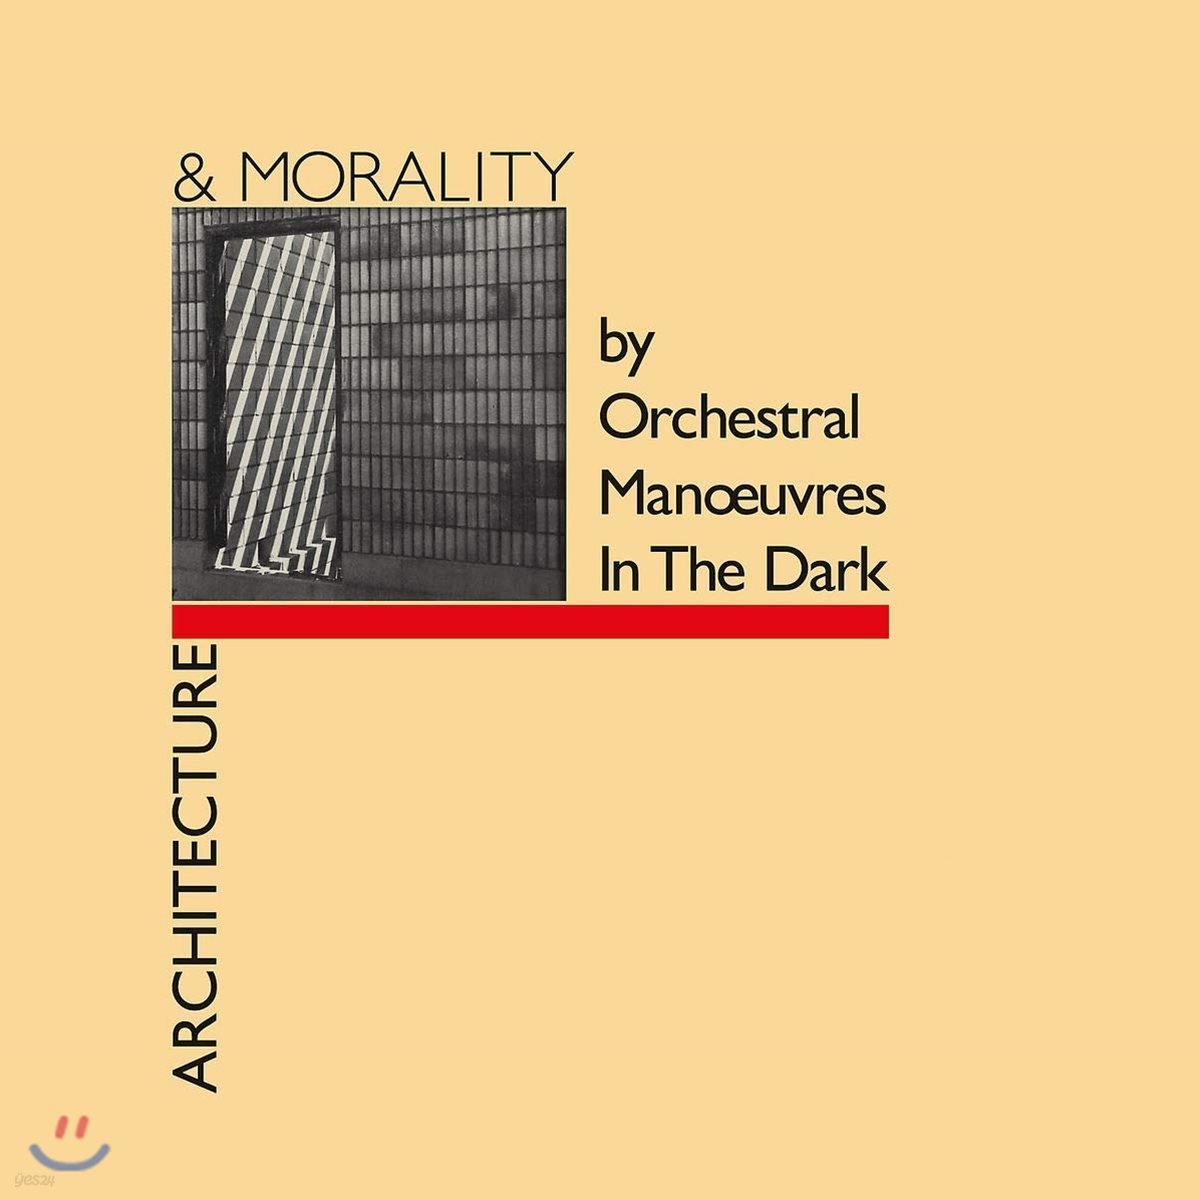 O.M.D (Orchestral Manoeuvres In The Dark) - Architecture &amp; Morality [LP]